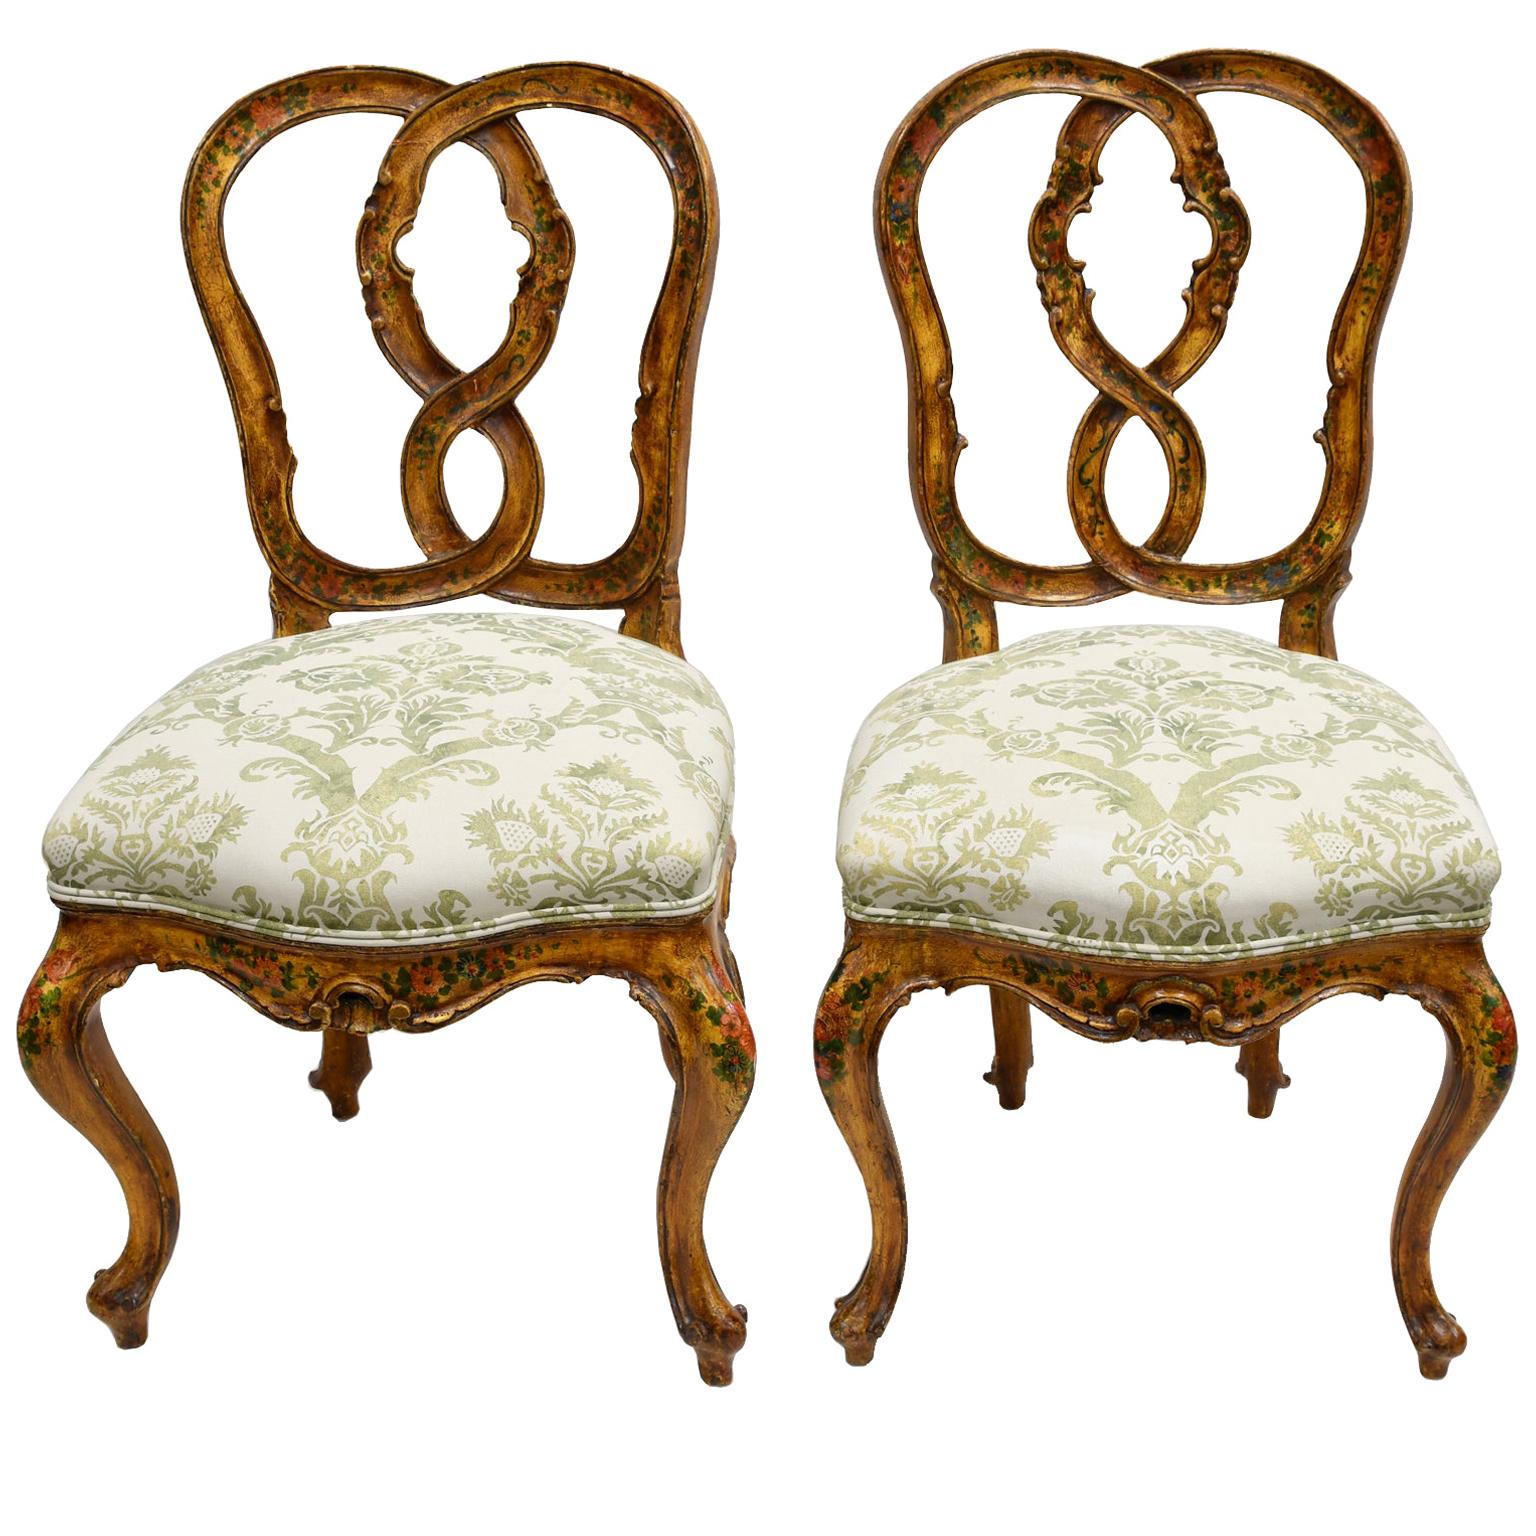 Pair of Antique Venetian Dining Chairs in Yellow Paint with Flowers & Upholstery